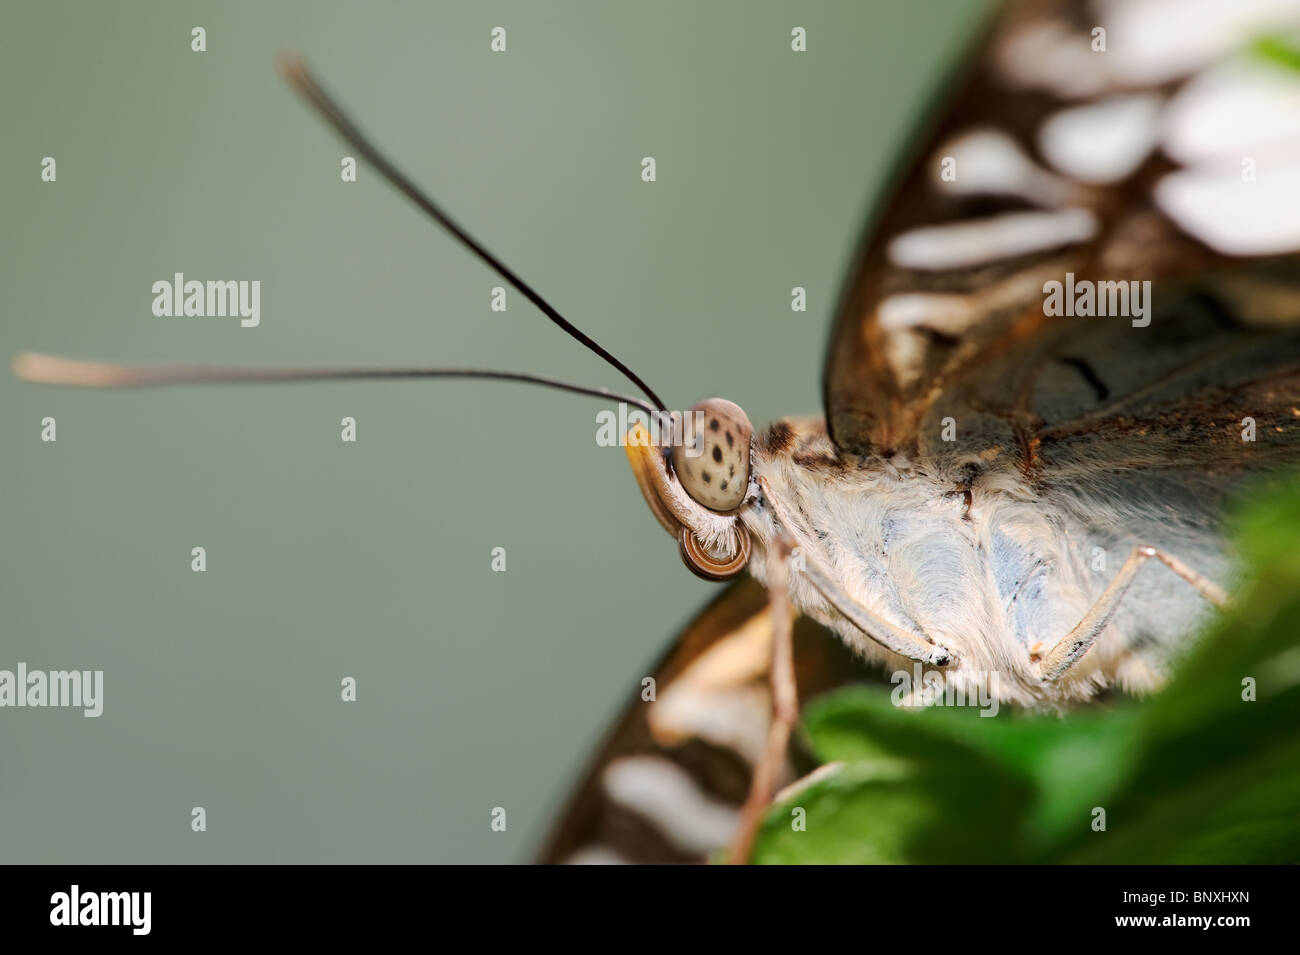 Closeup of the head, eyes and antennas of a brown butterfly Stock Photo